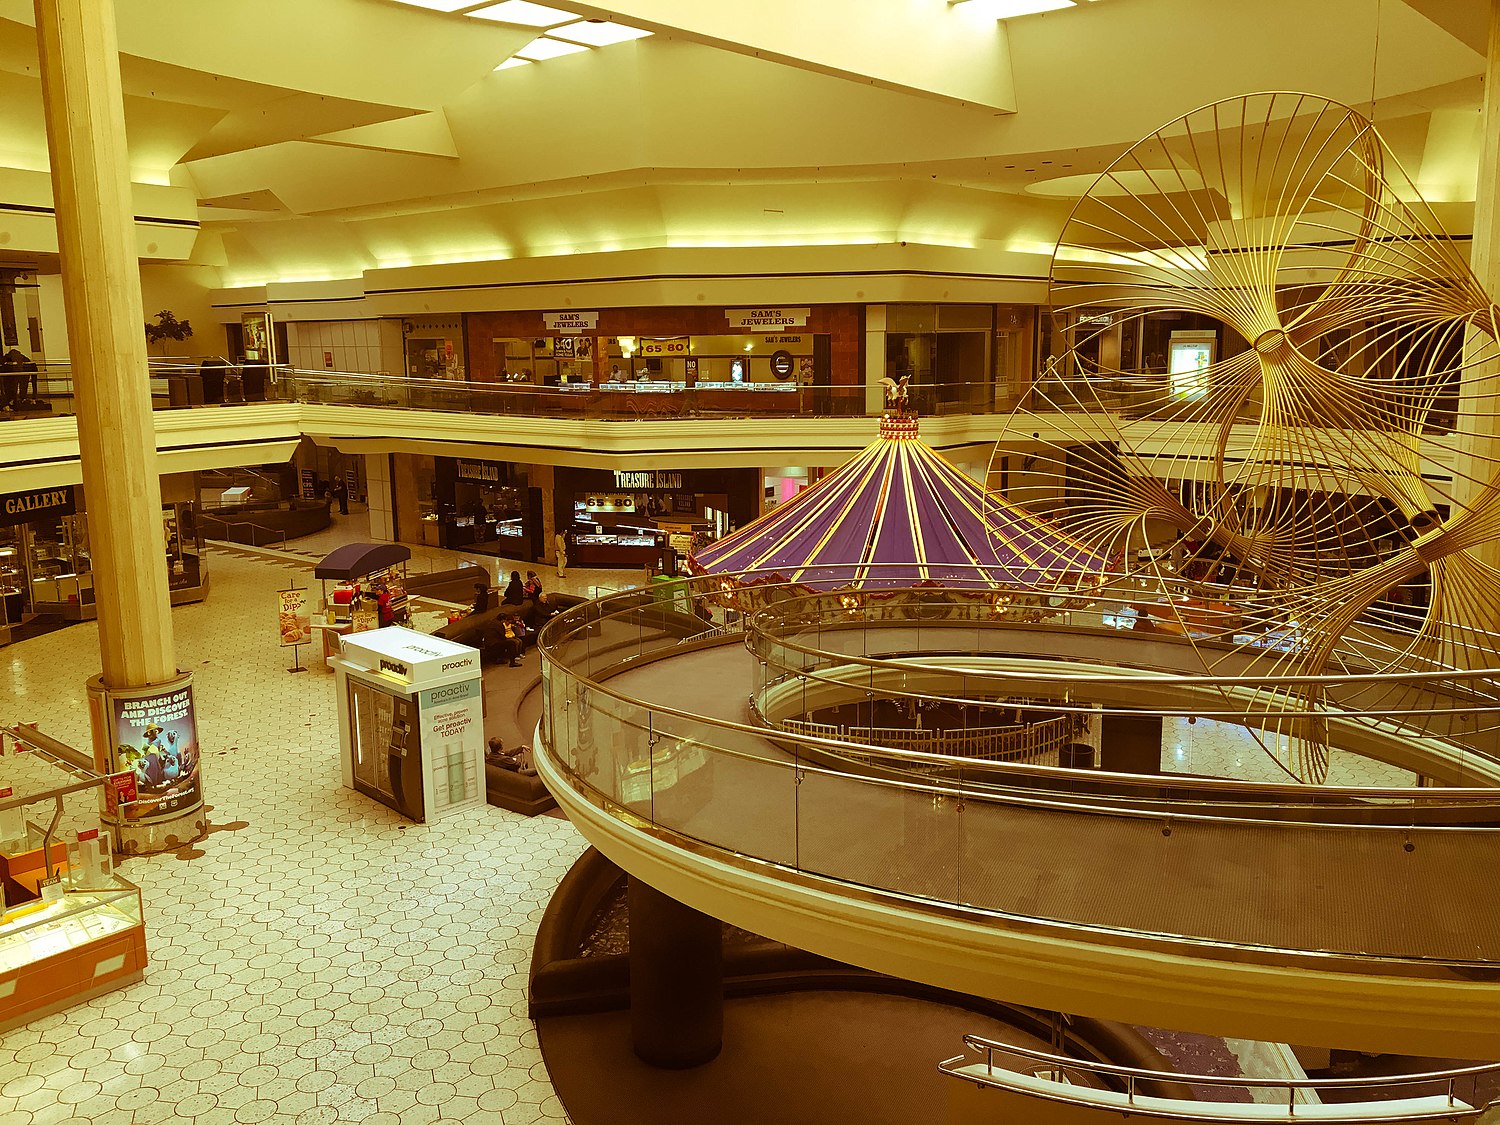 Category:Malls that opened in 1986, Malls and Retail Wiki